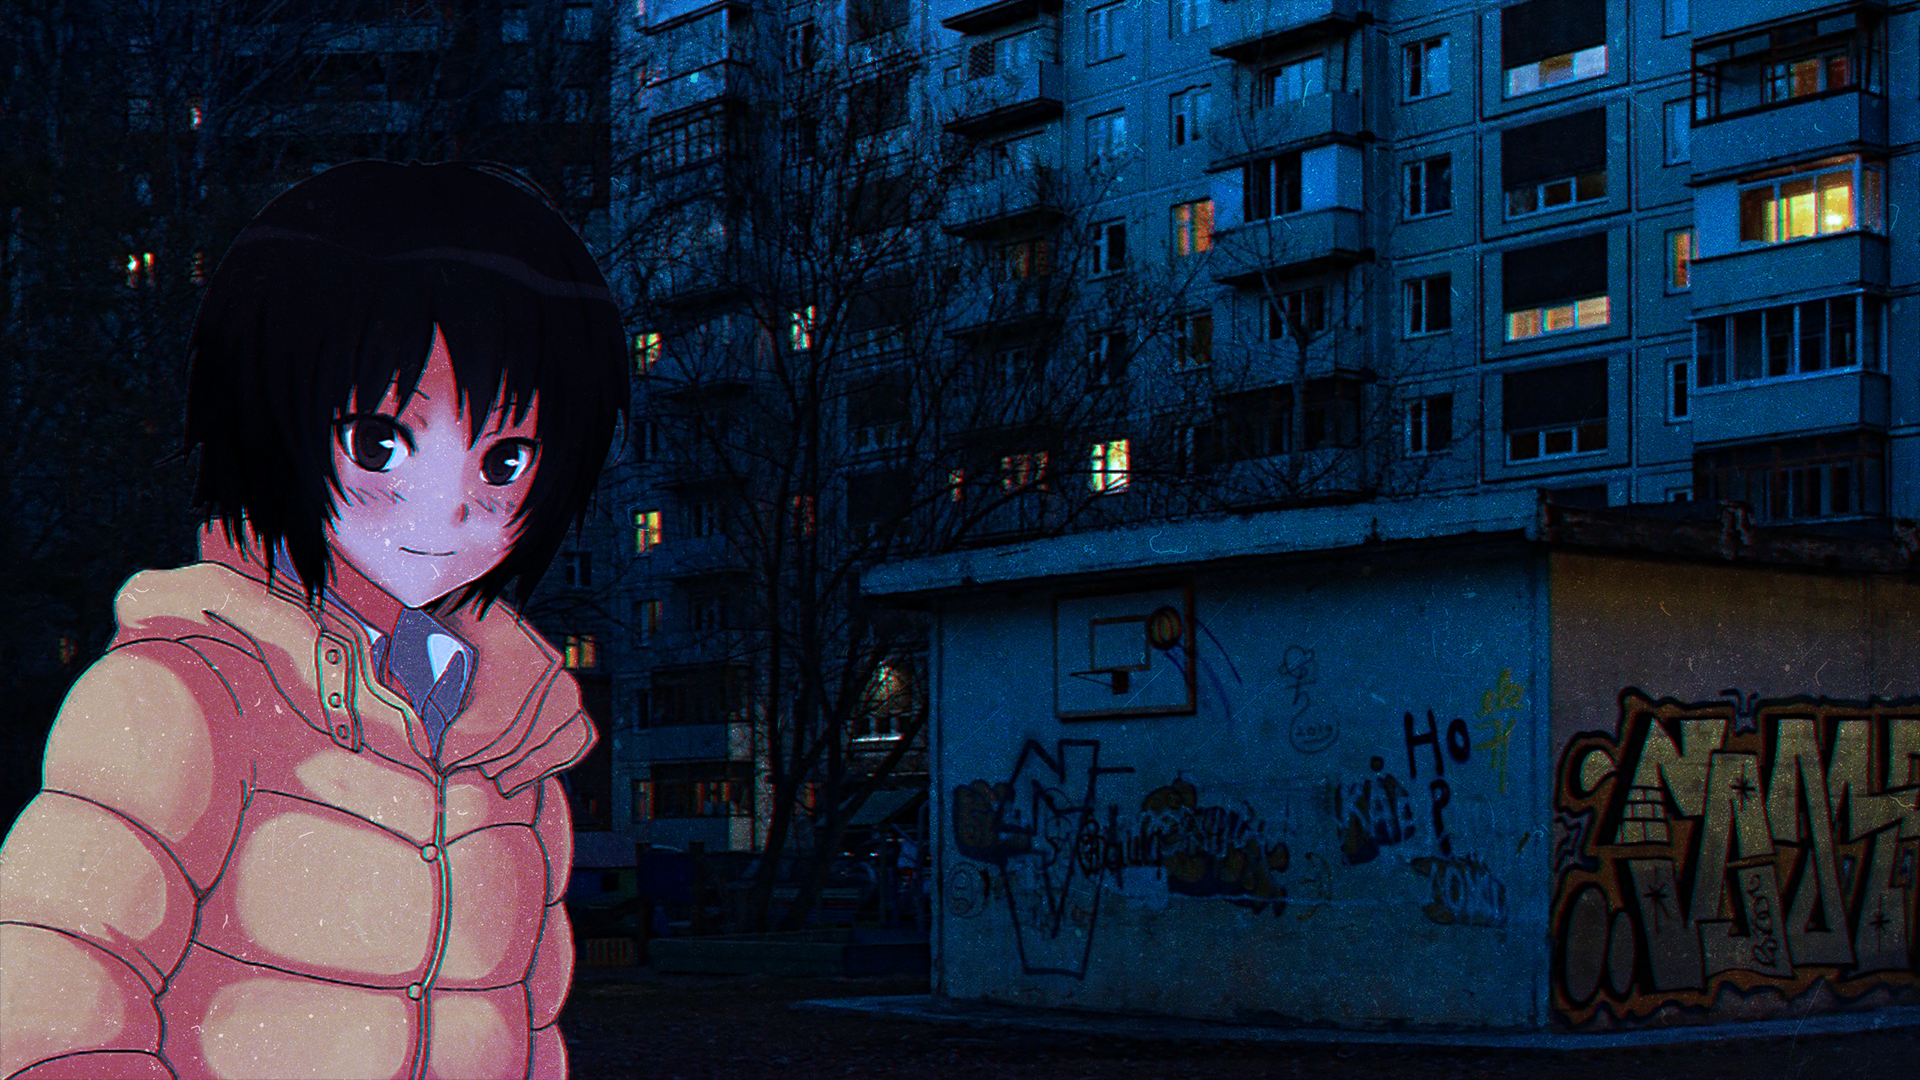 Real-world Russia is a surprisingly awesome backdrop for anime